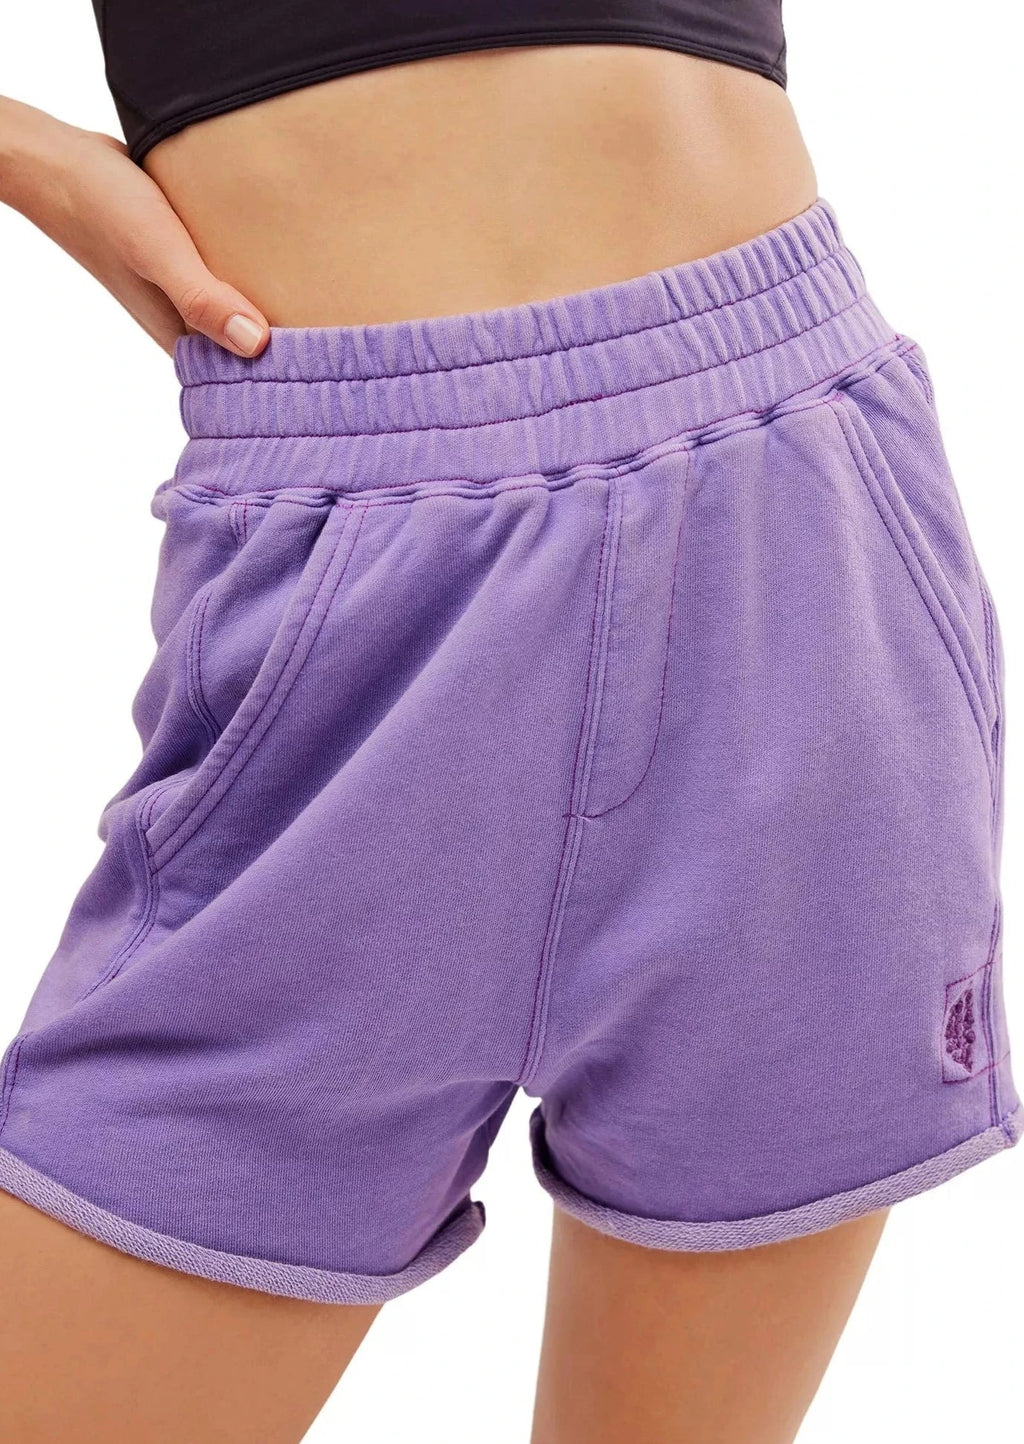 FP Movement All Star Solid Shorts